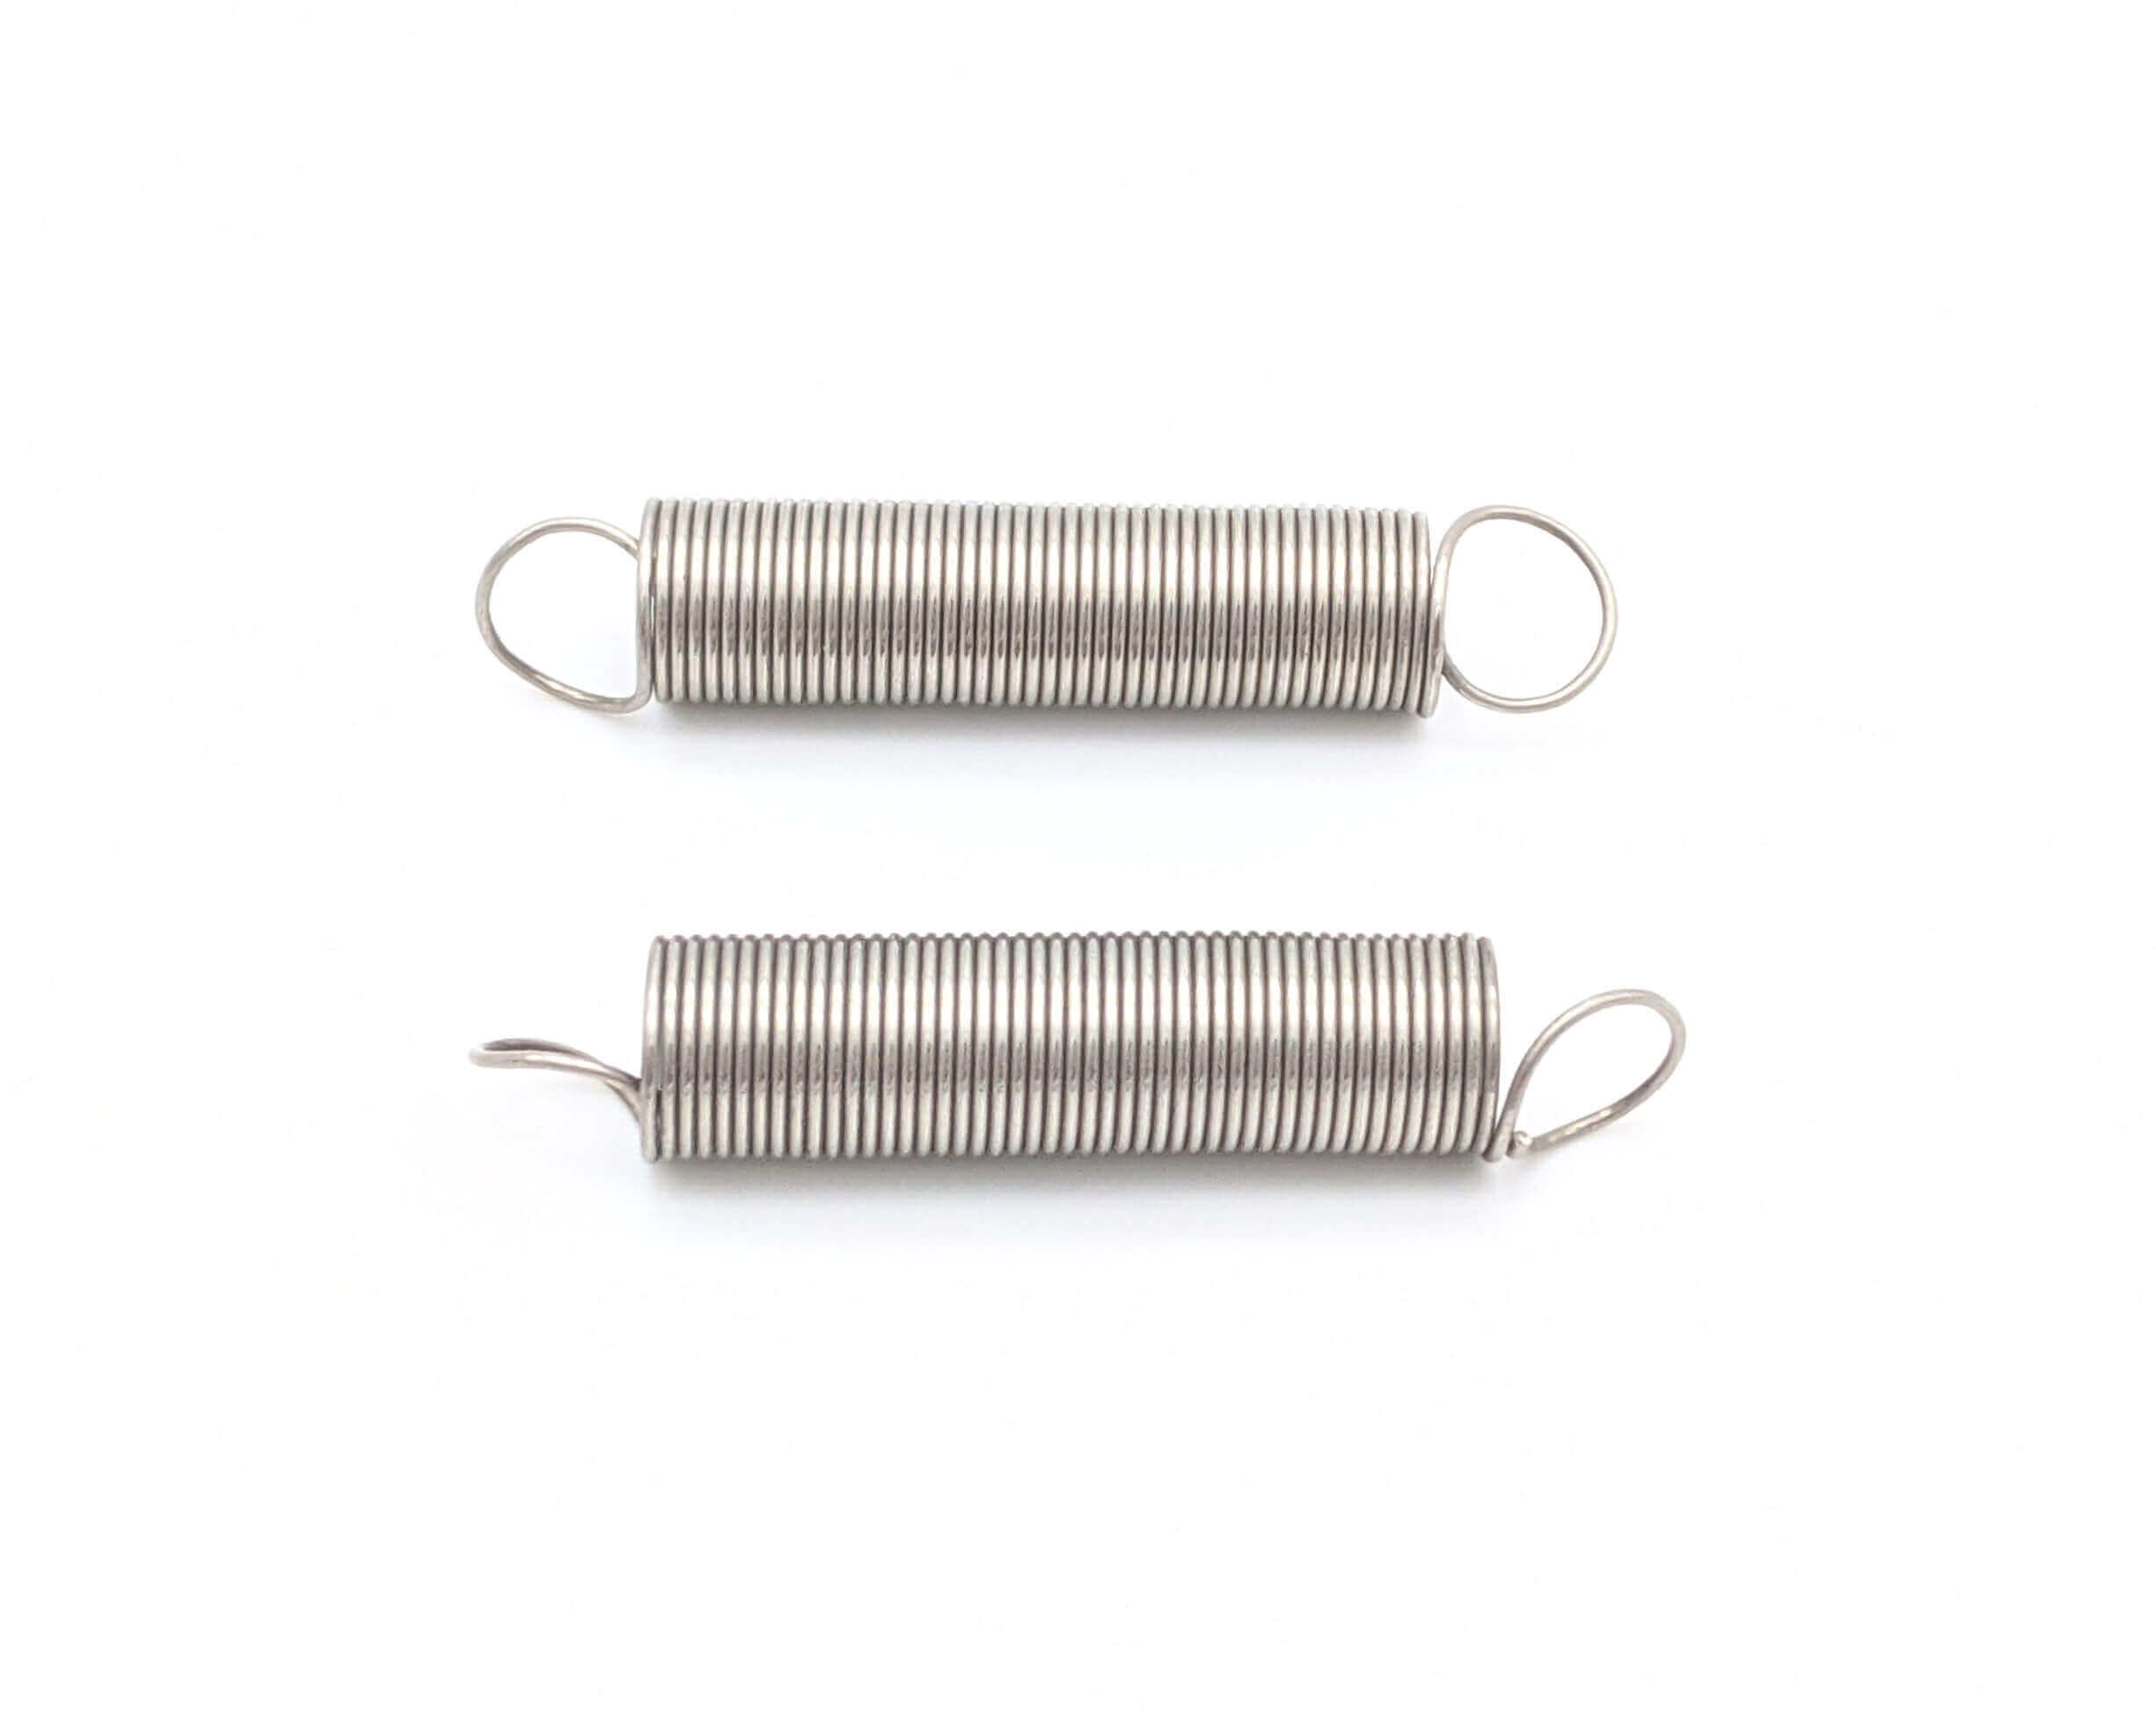 Mechanical Parts Extension Compression Spring 1pcs-Multiple specifications Wire Diameter 2mm Tension Spring with Hooks Steel Small Extension Spring Outer Diameter 16mm Length 50-100mm Size : 2 x 16 x 